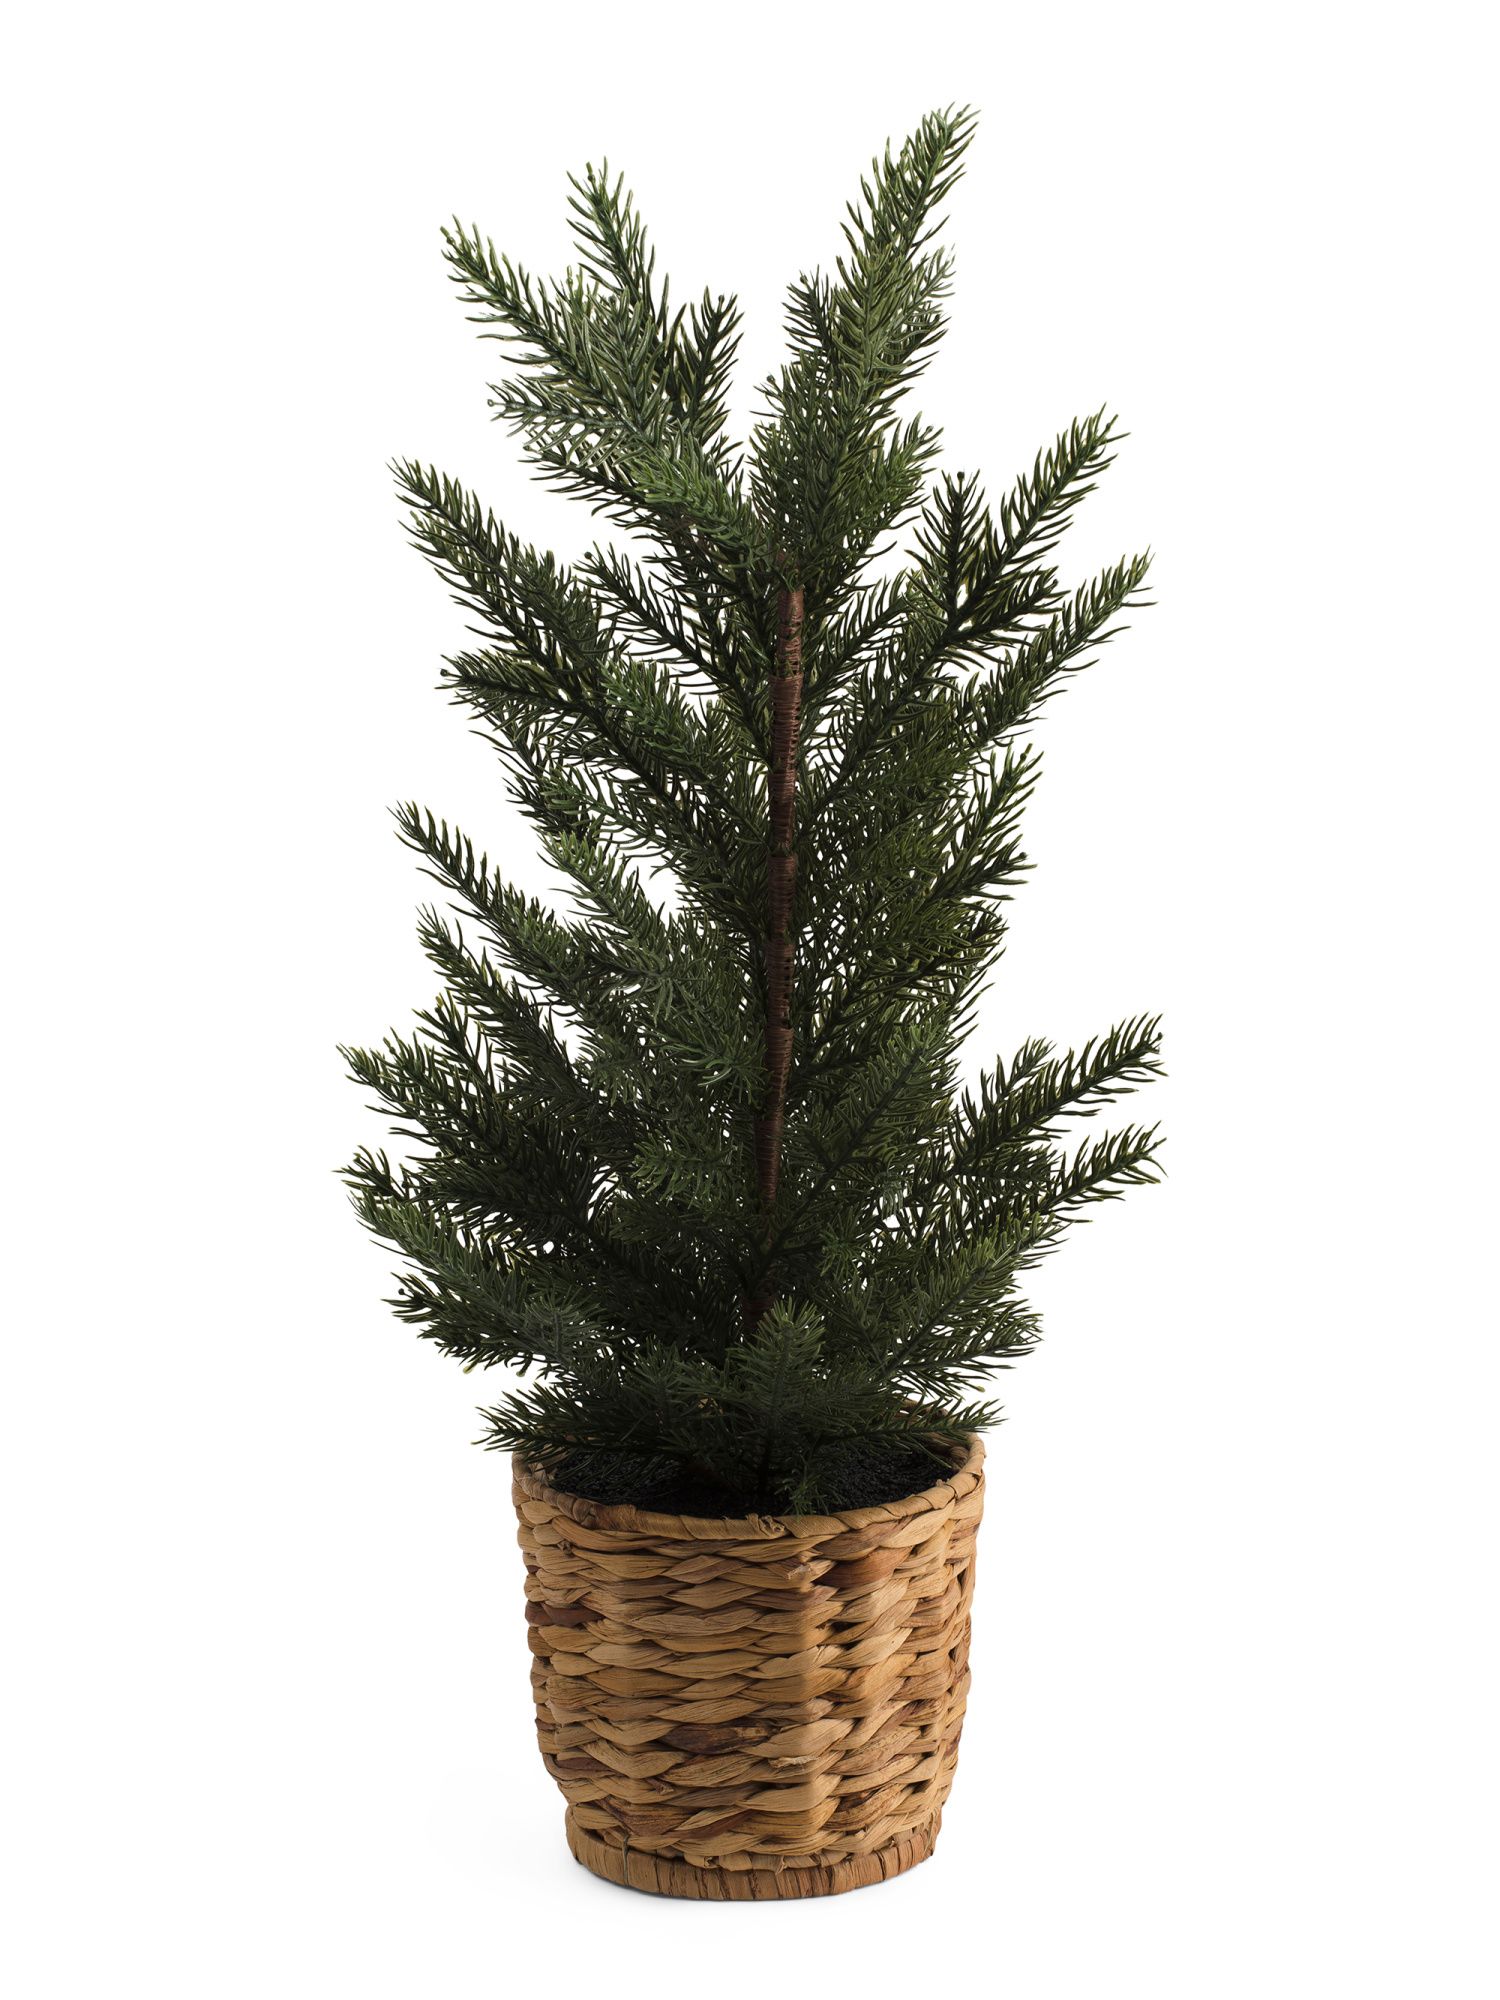 2ft Fir Tree In Footed Basket | TJ Maxx